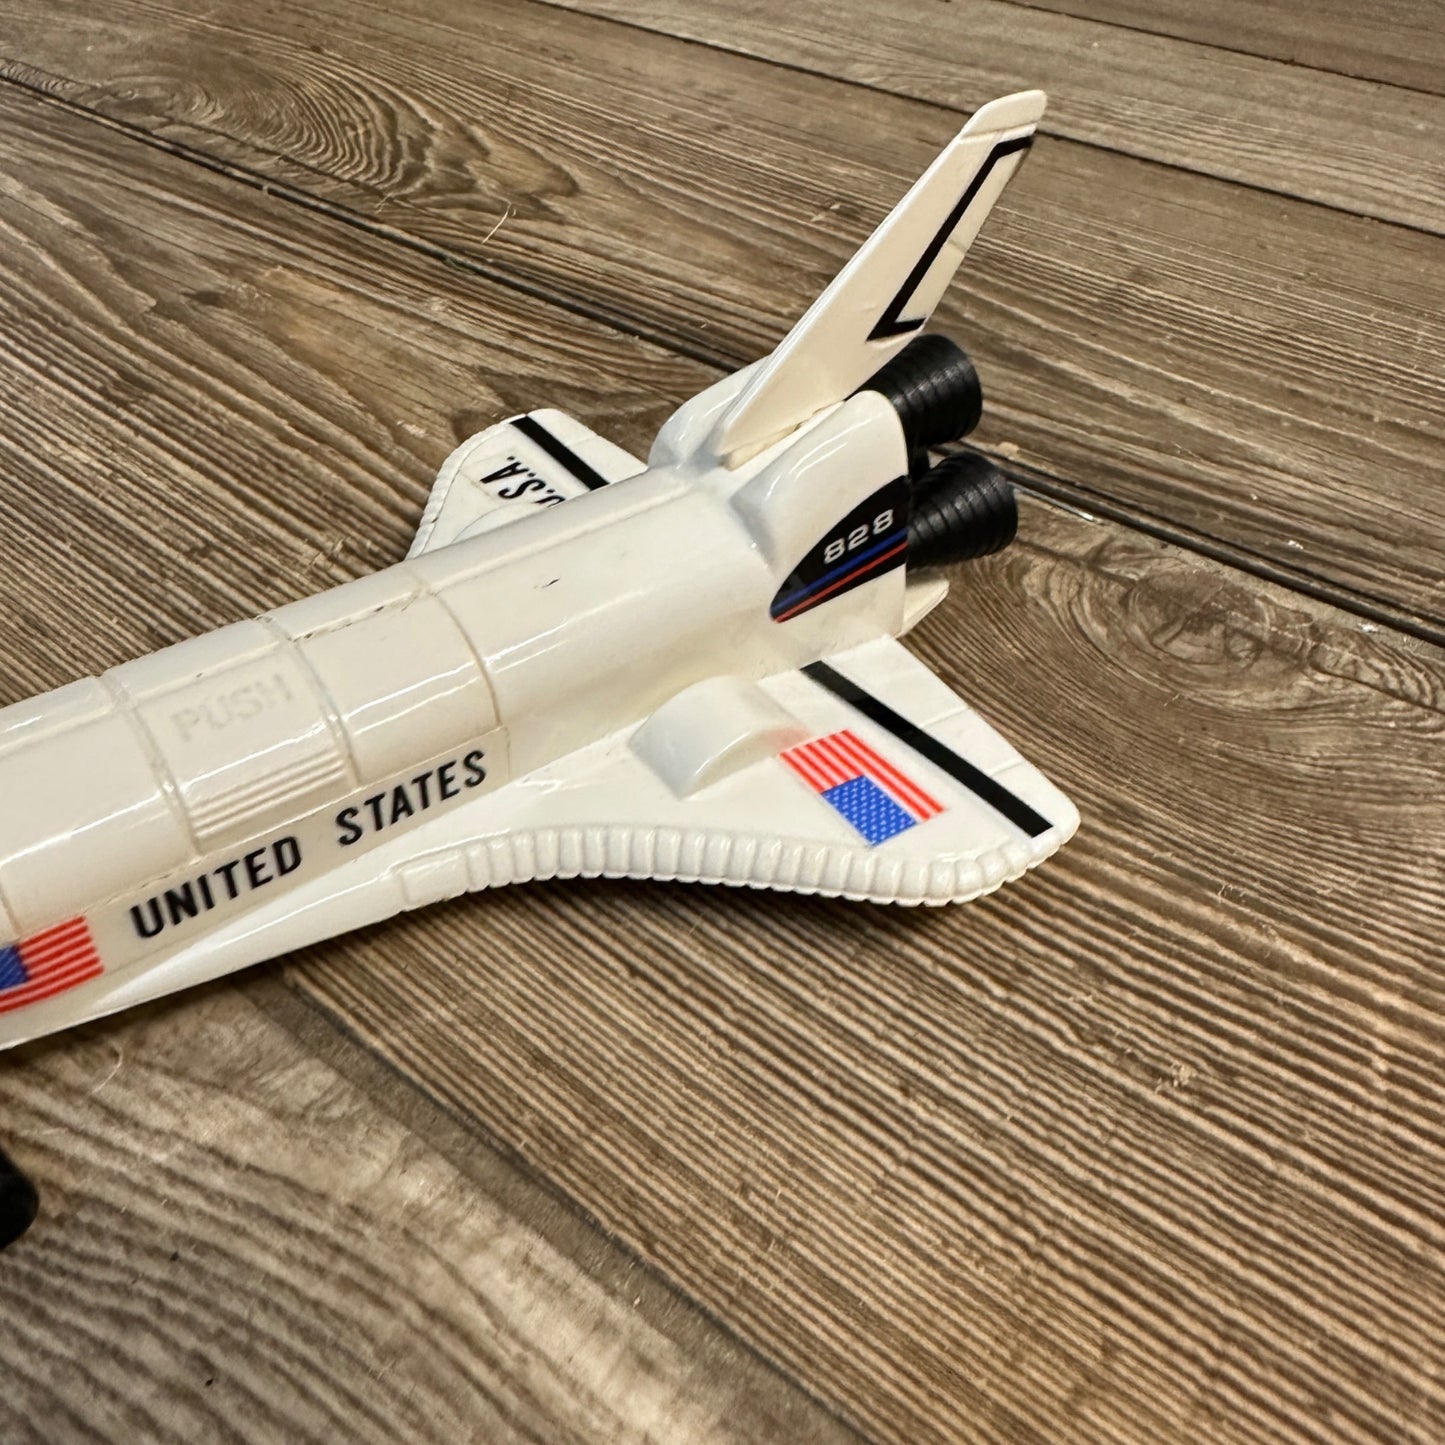 VINTAGE TOY SPACE SHUTTLE BATTERY WESTMINSTER R.O.C. MADE IN TAIWAN 1987